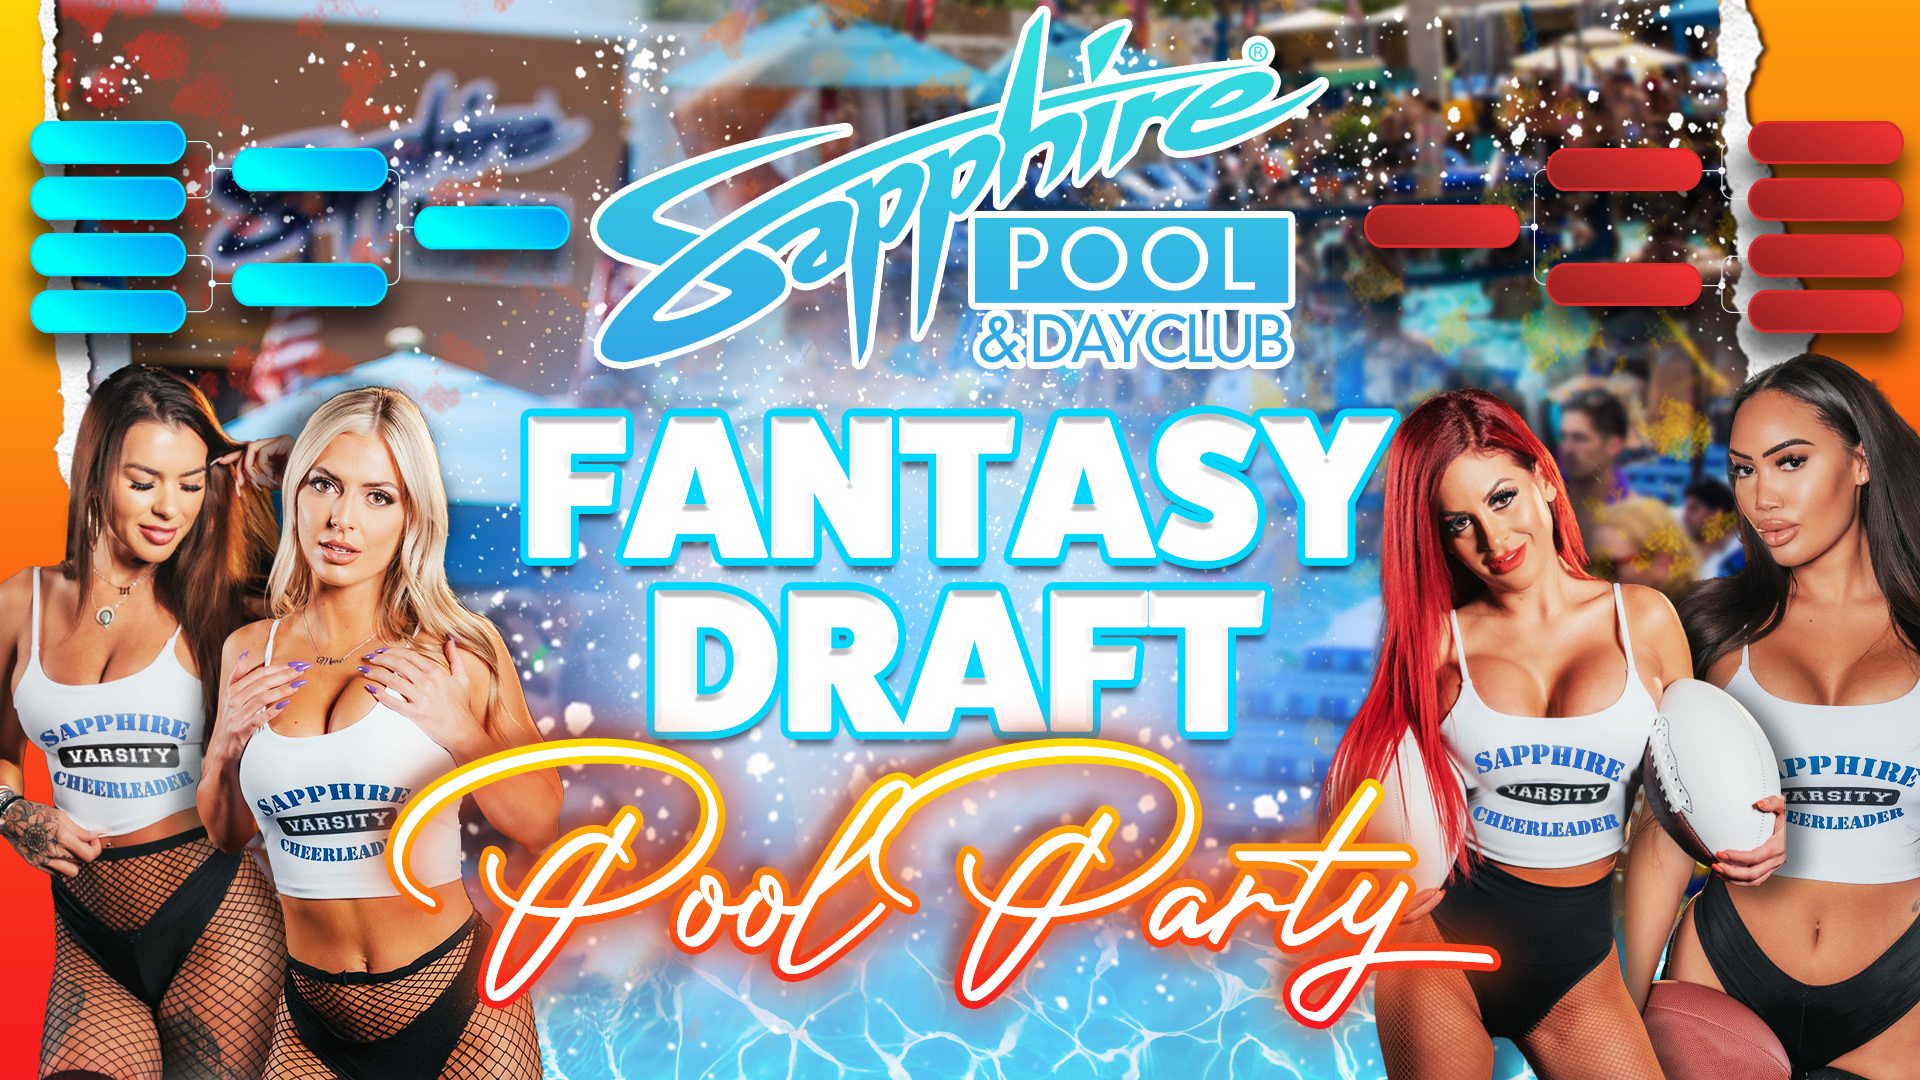 Sapphire Pool - Fantasy Draft Pool Party - 4 cocktail waitresses in pool attire